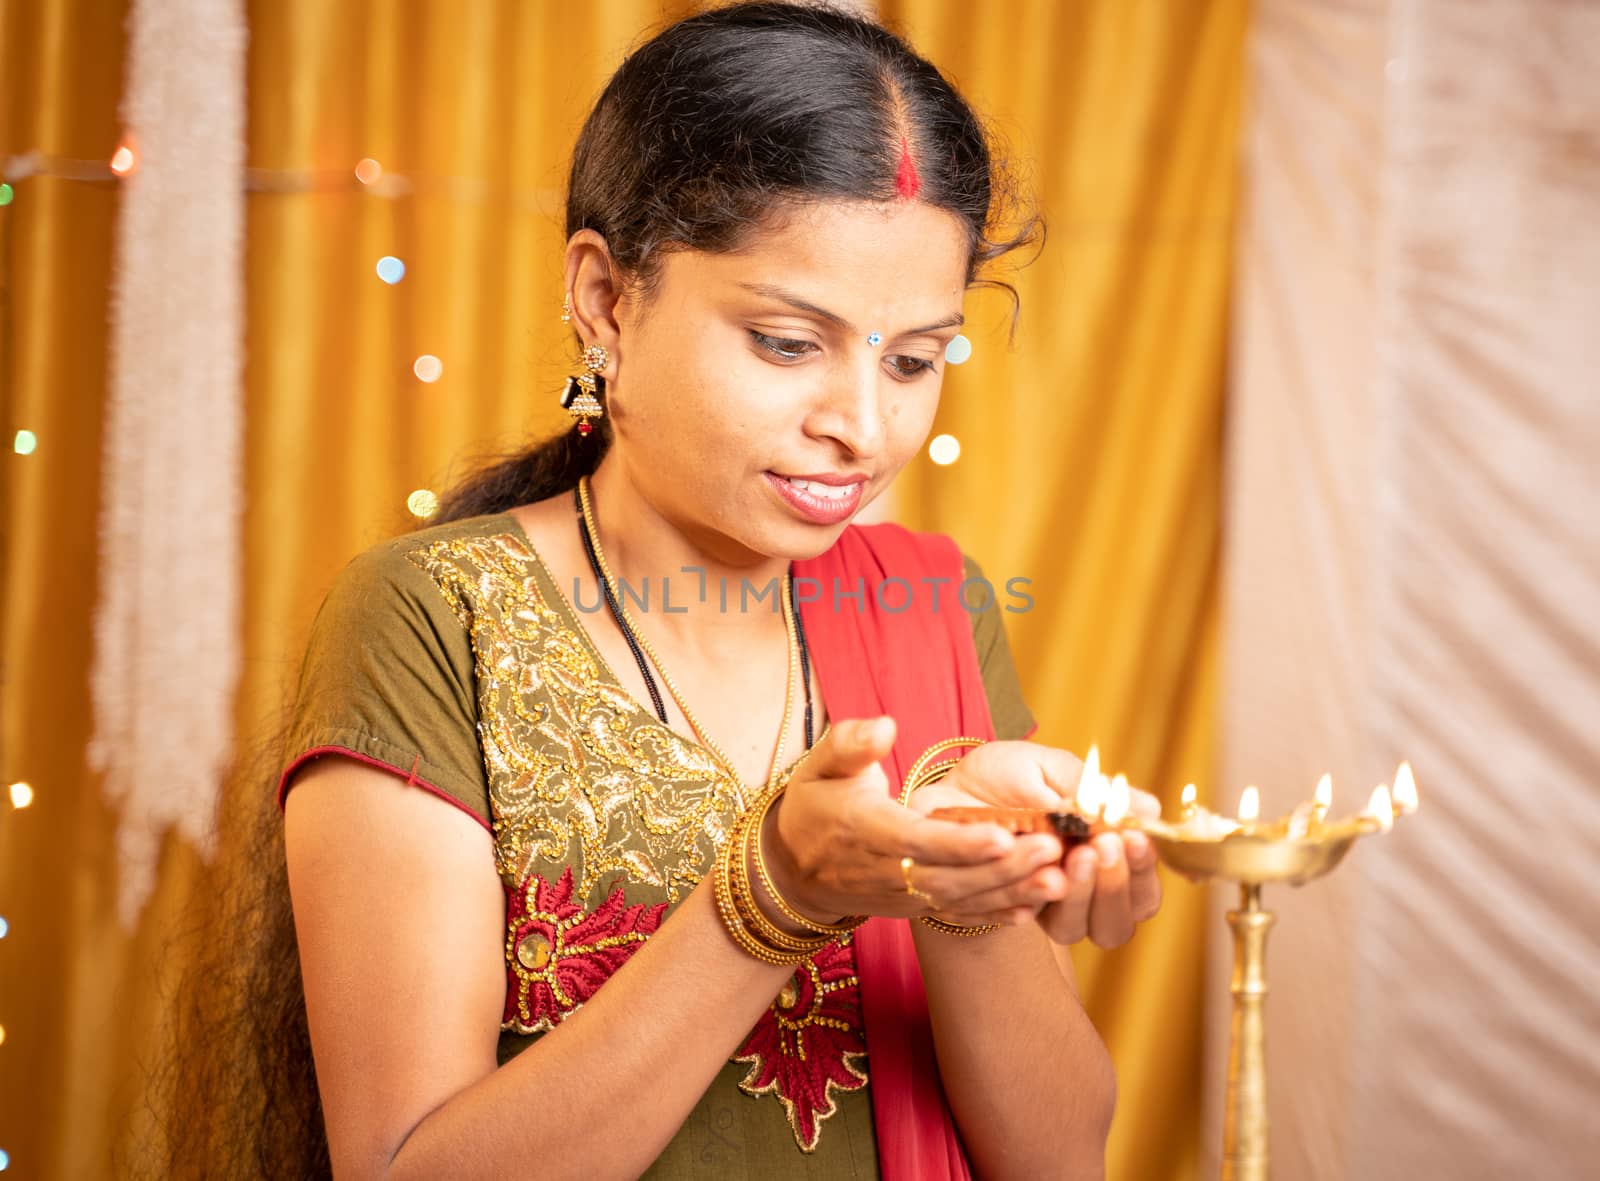 Happy smiling Indian woman lighting lantern or Diya Lamp during festival ceremony at home - concept of traditional festival and ritual celebrations. by lakshmiprasad.maski@gmai.com